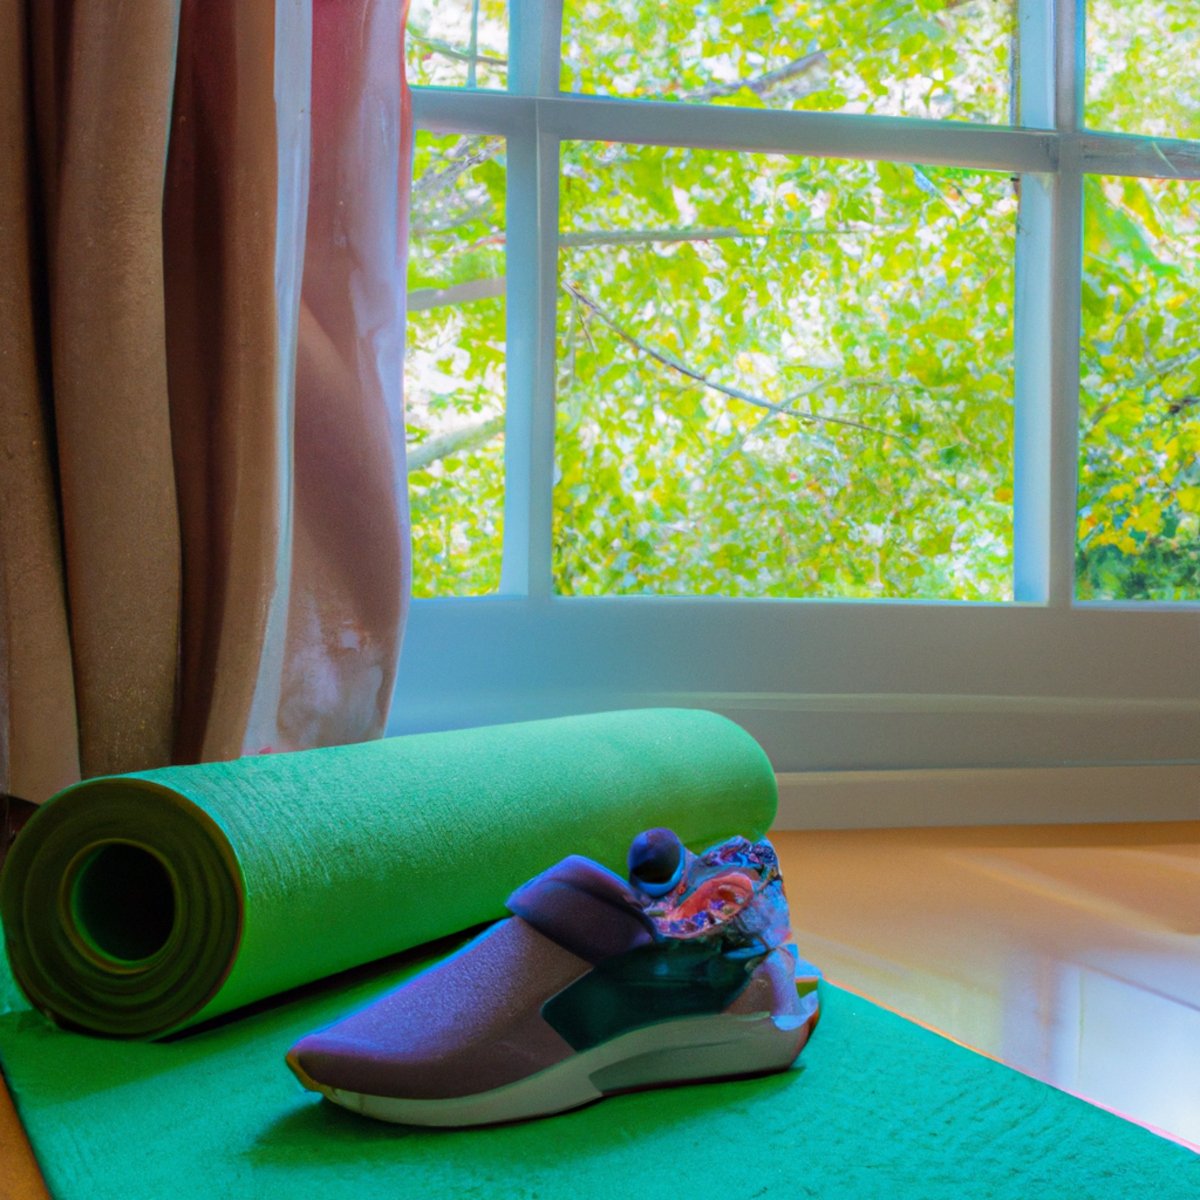 A serene room with a yoga mat, running shoes, water bottle, and books, inviting readers to explore stress relief through exercise.